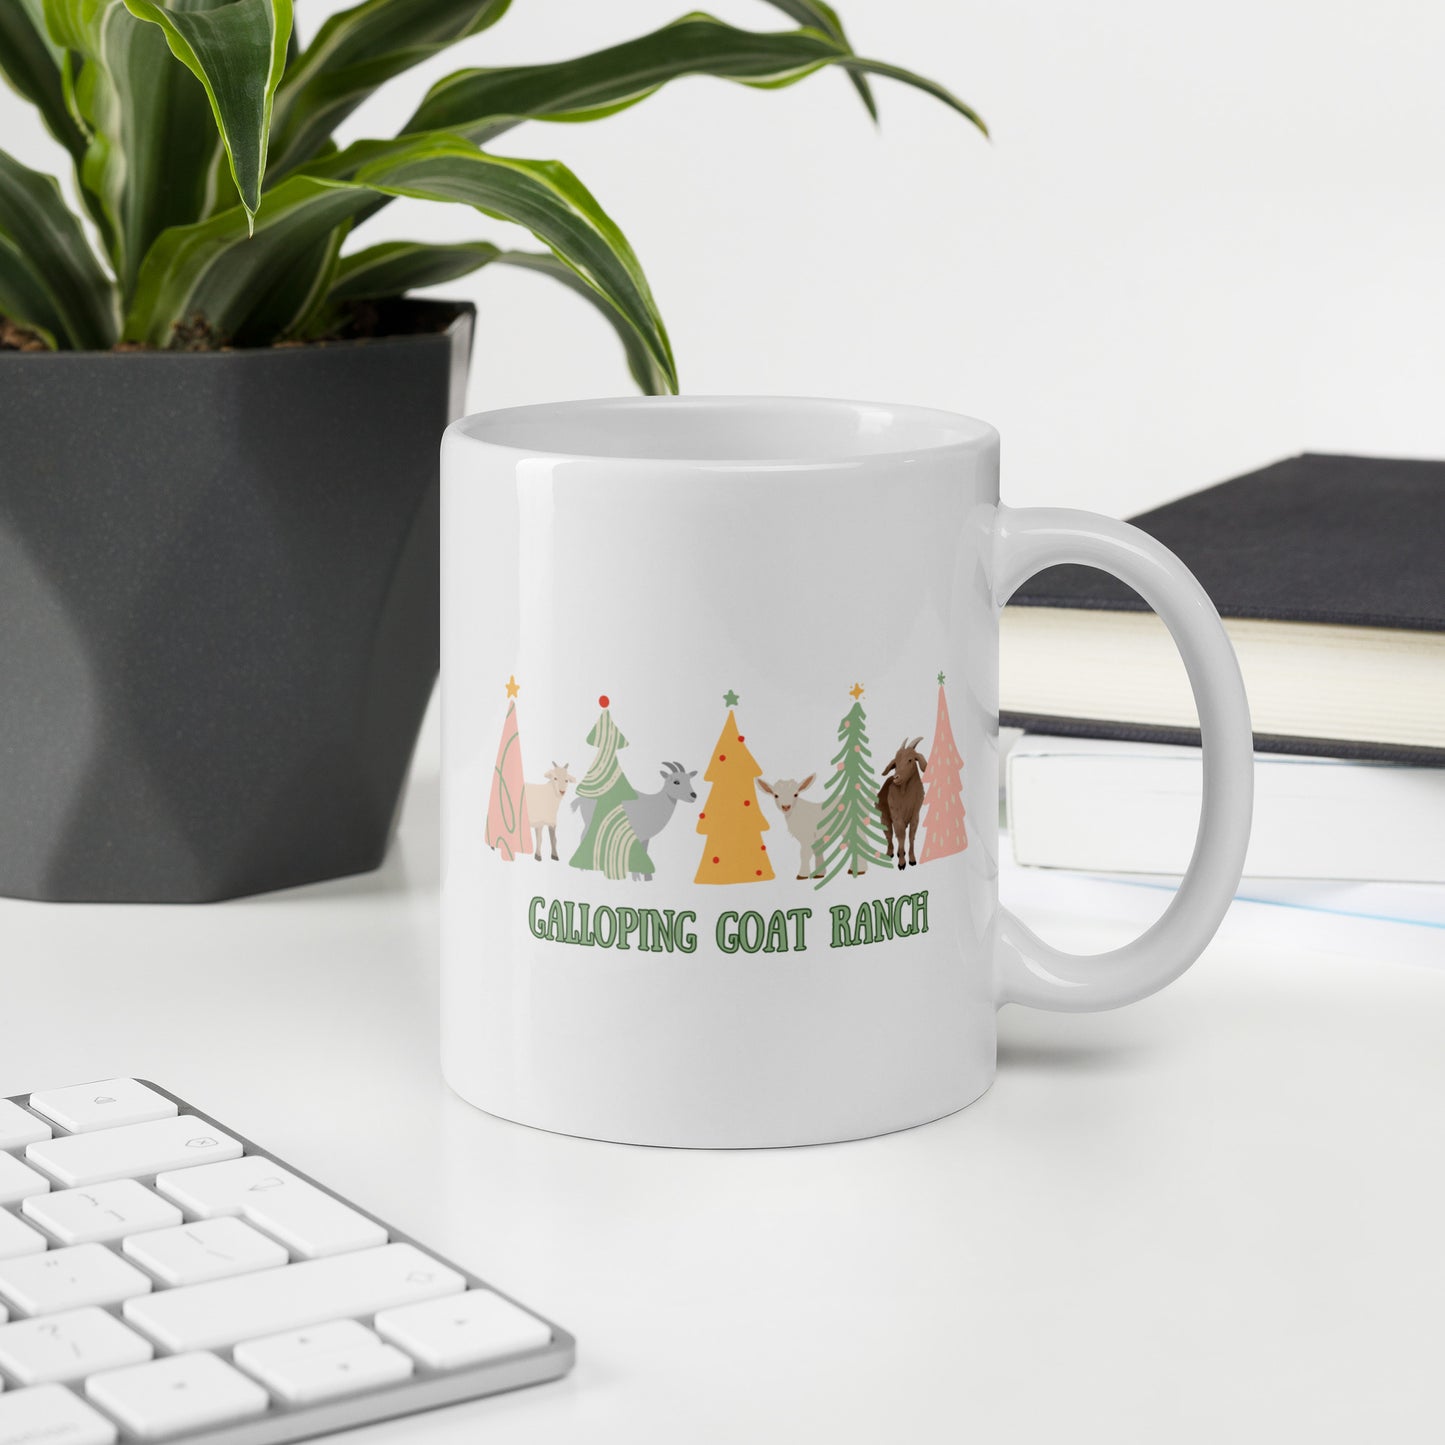 Galloping Goats In Trees: White glossy mug